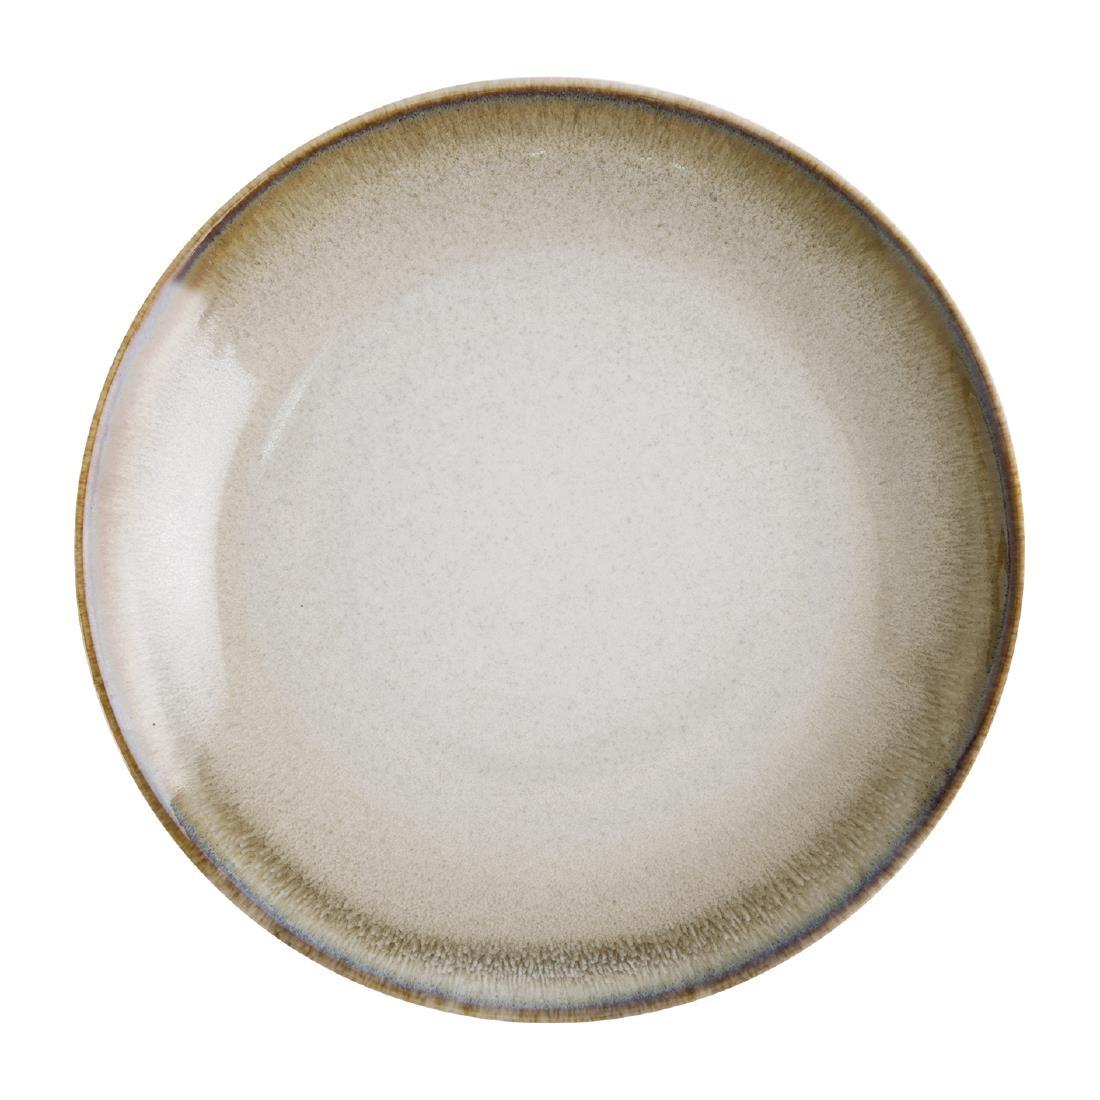 Olympia Birch Taupe Coupe Plates 270mm (Pack of 6) - DR783  - 1